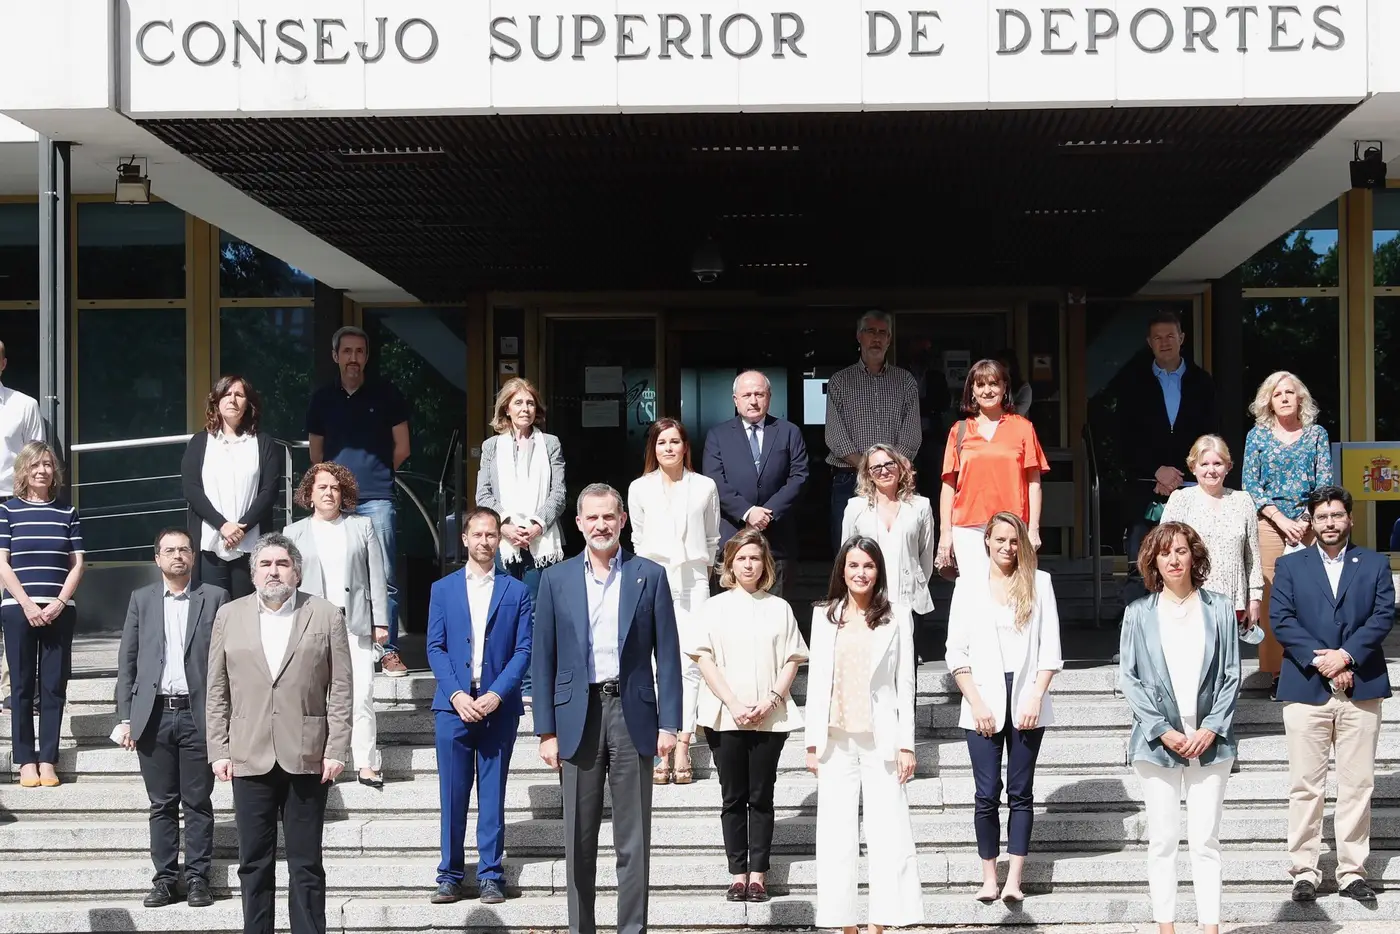 King Felipe and Queen Letizia of Spain visited the High Performance Center